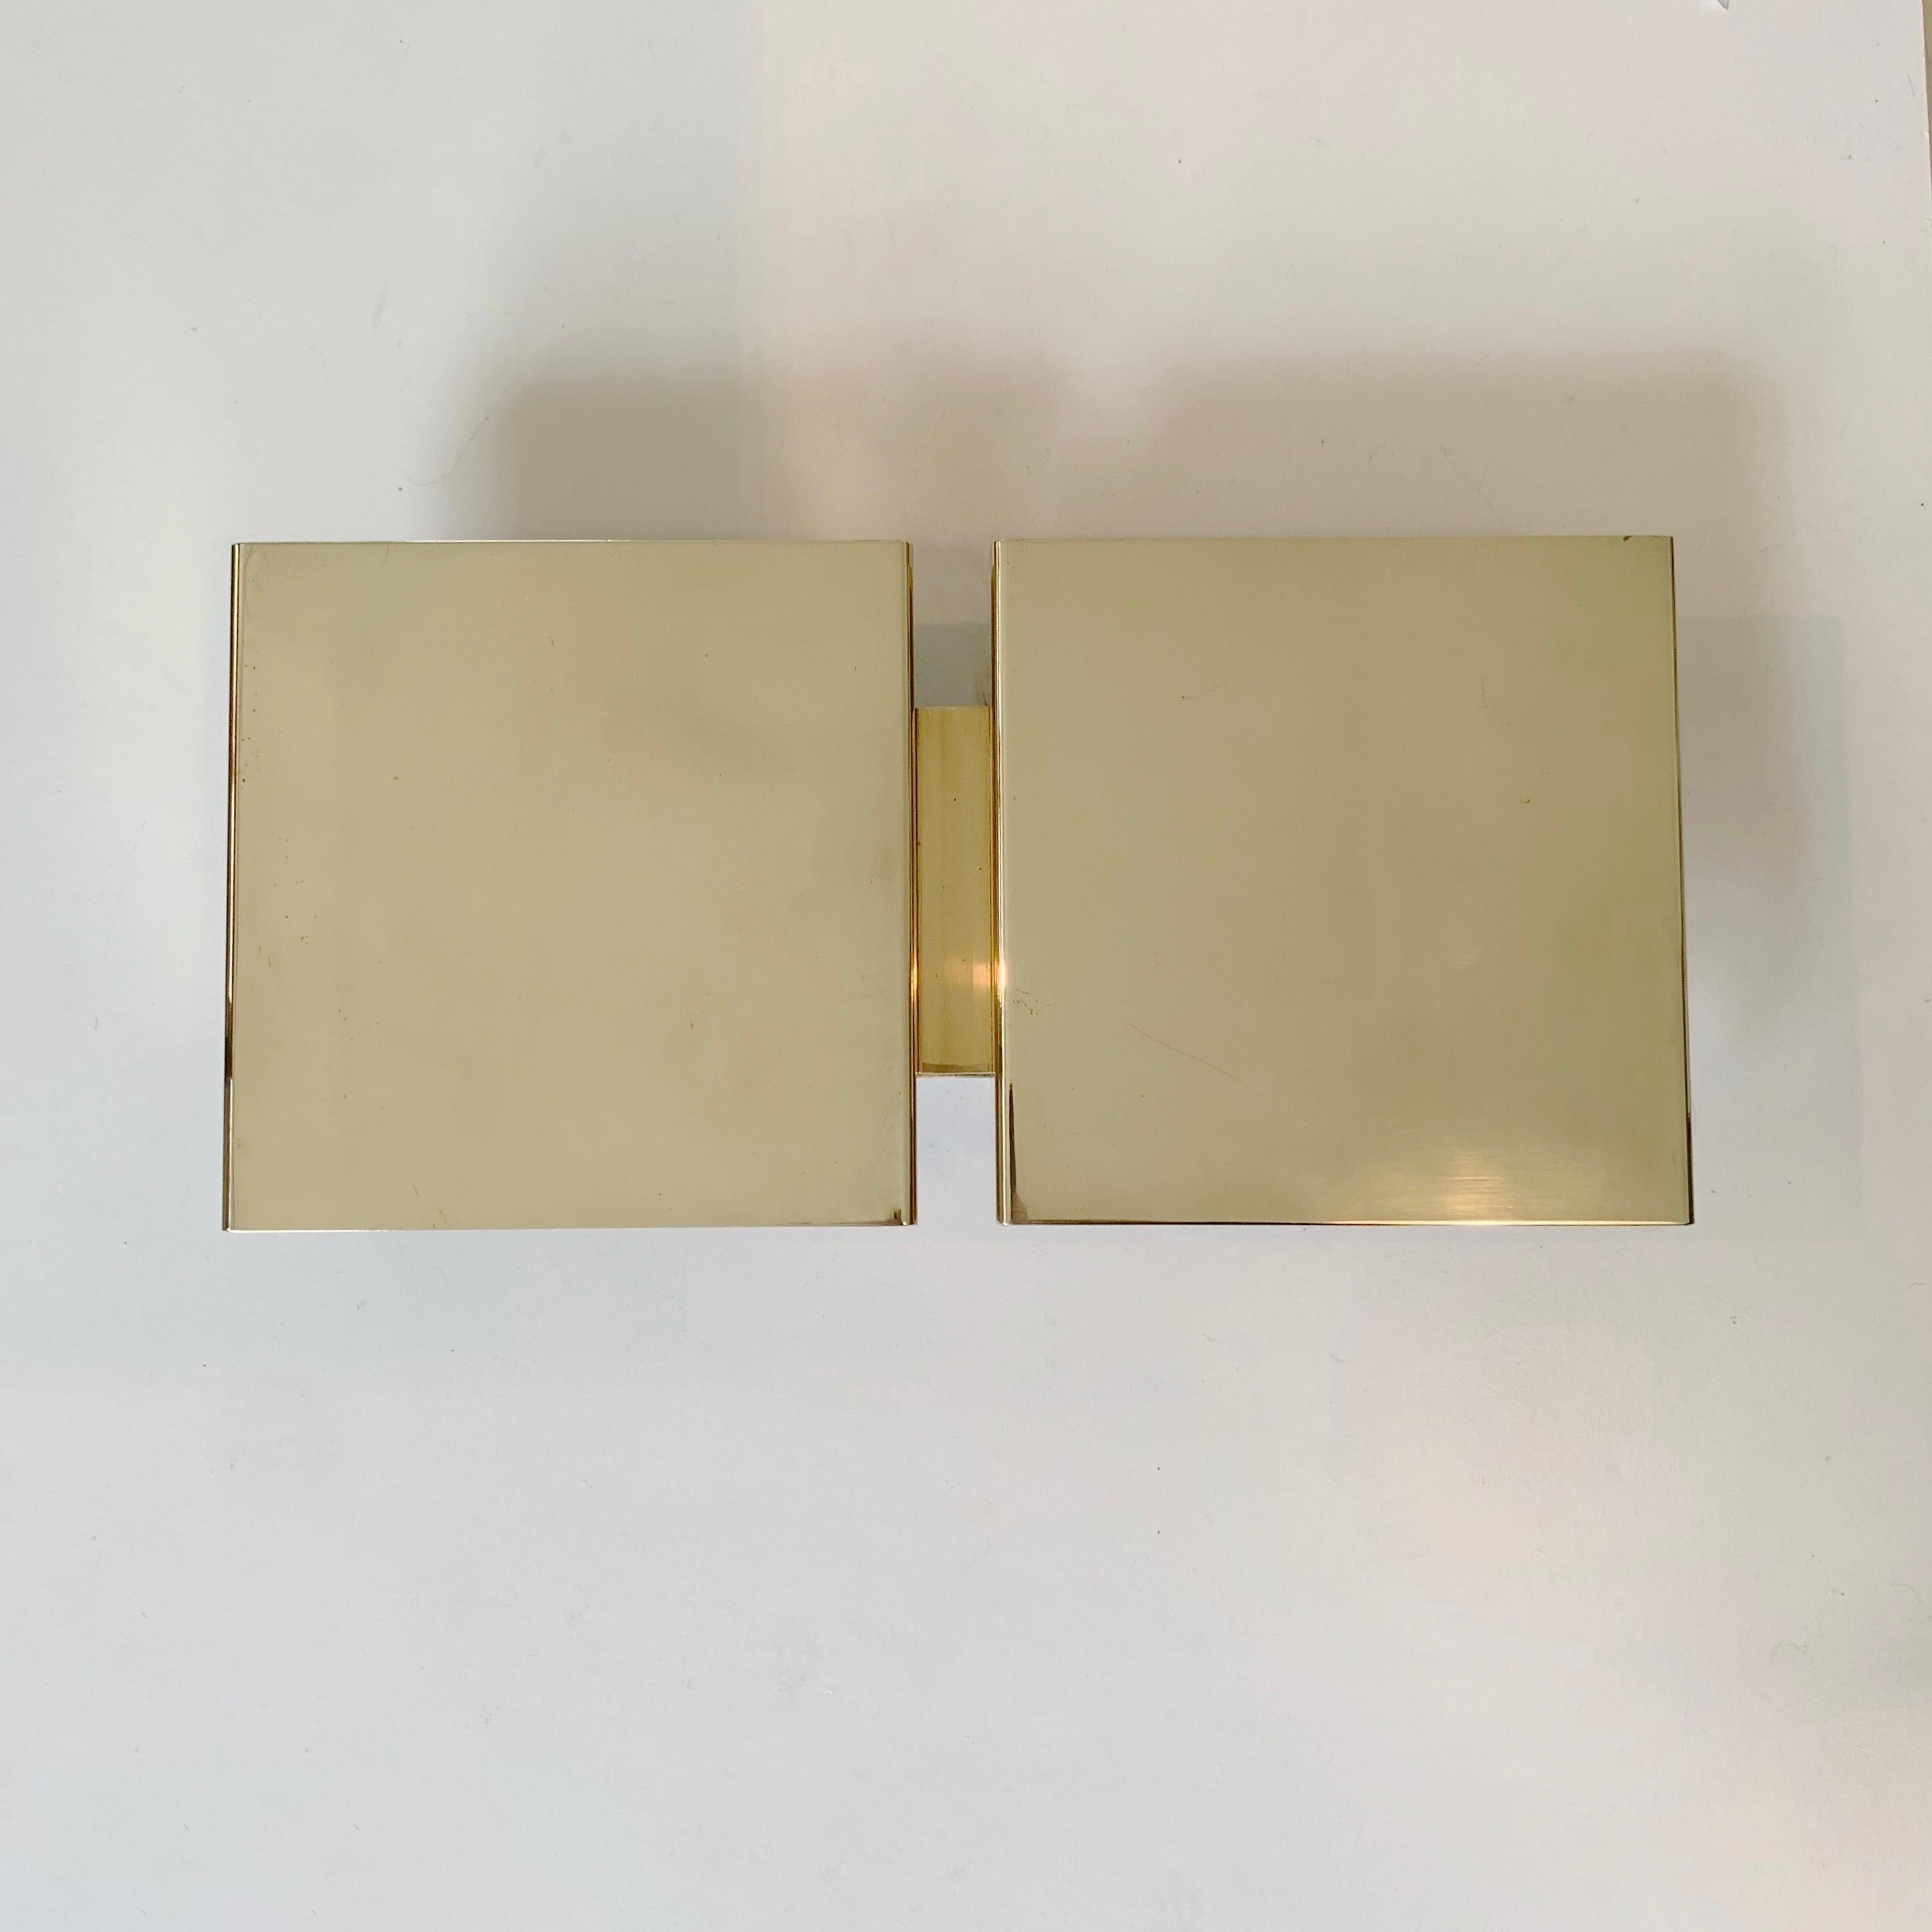 Original vintage Christophe Gevers GE20 wall sconces, circa 1975, Belgium.
Edited by Light.
Polished brass.
Two E14 bulbs.
Dimensions: 18 cm H, 38 cm W, 8 cm D.
Good original condition.
All purchases are covered by our Buyer Protection